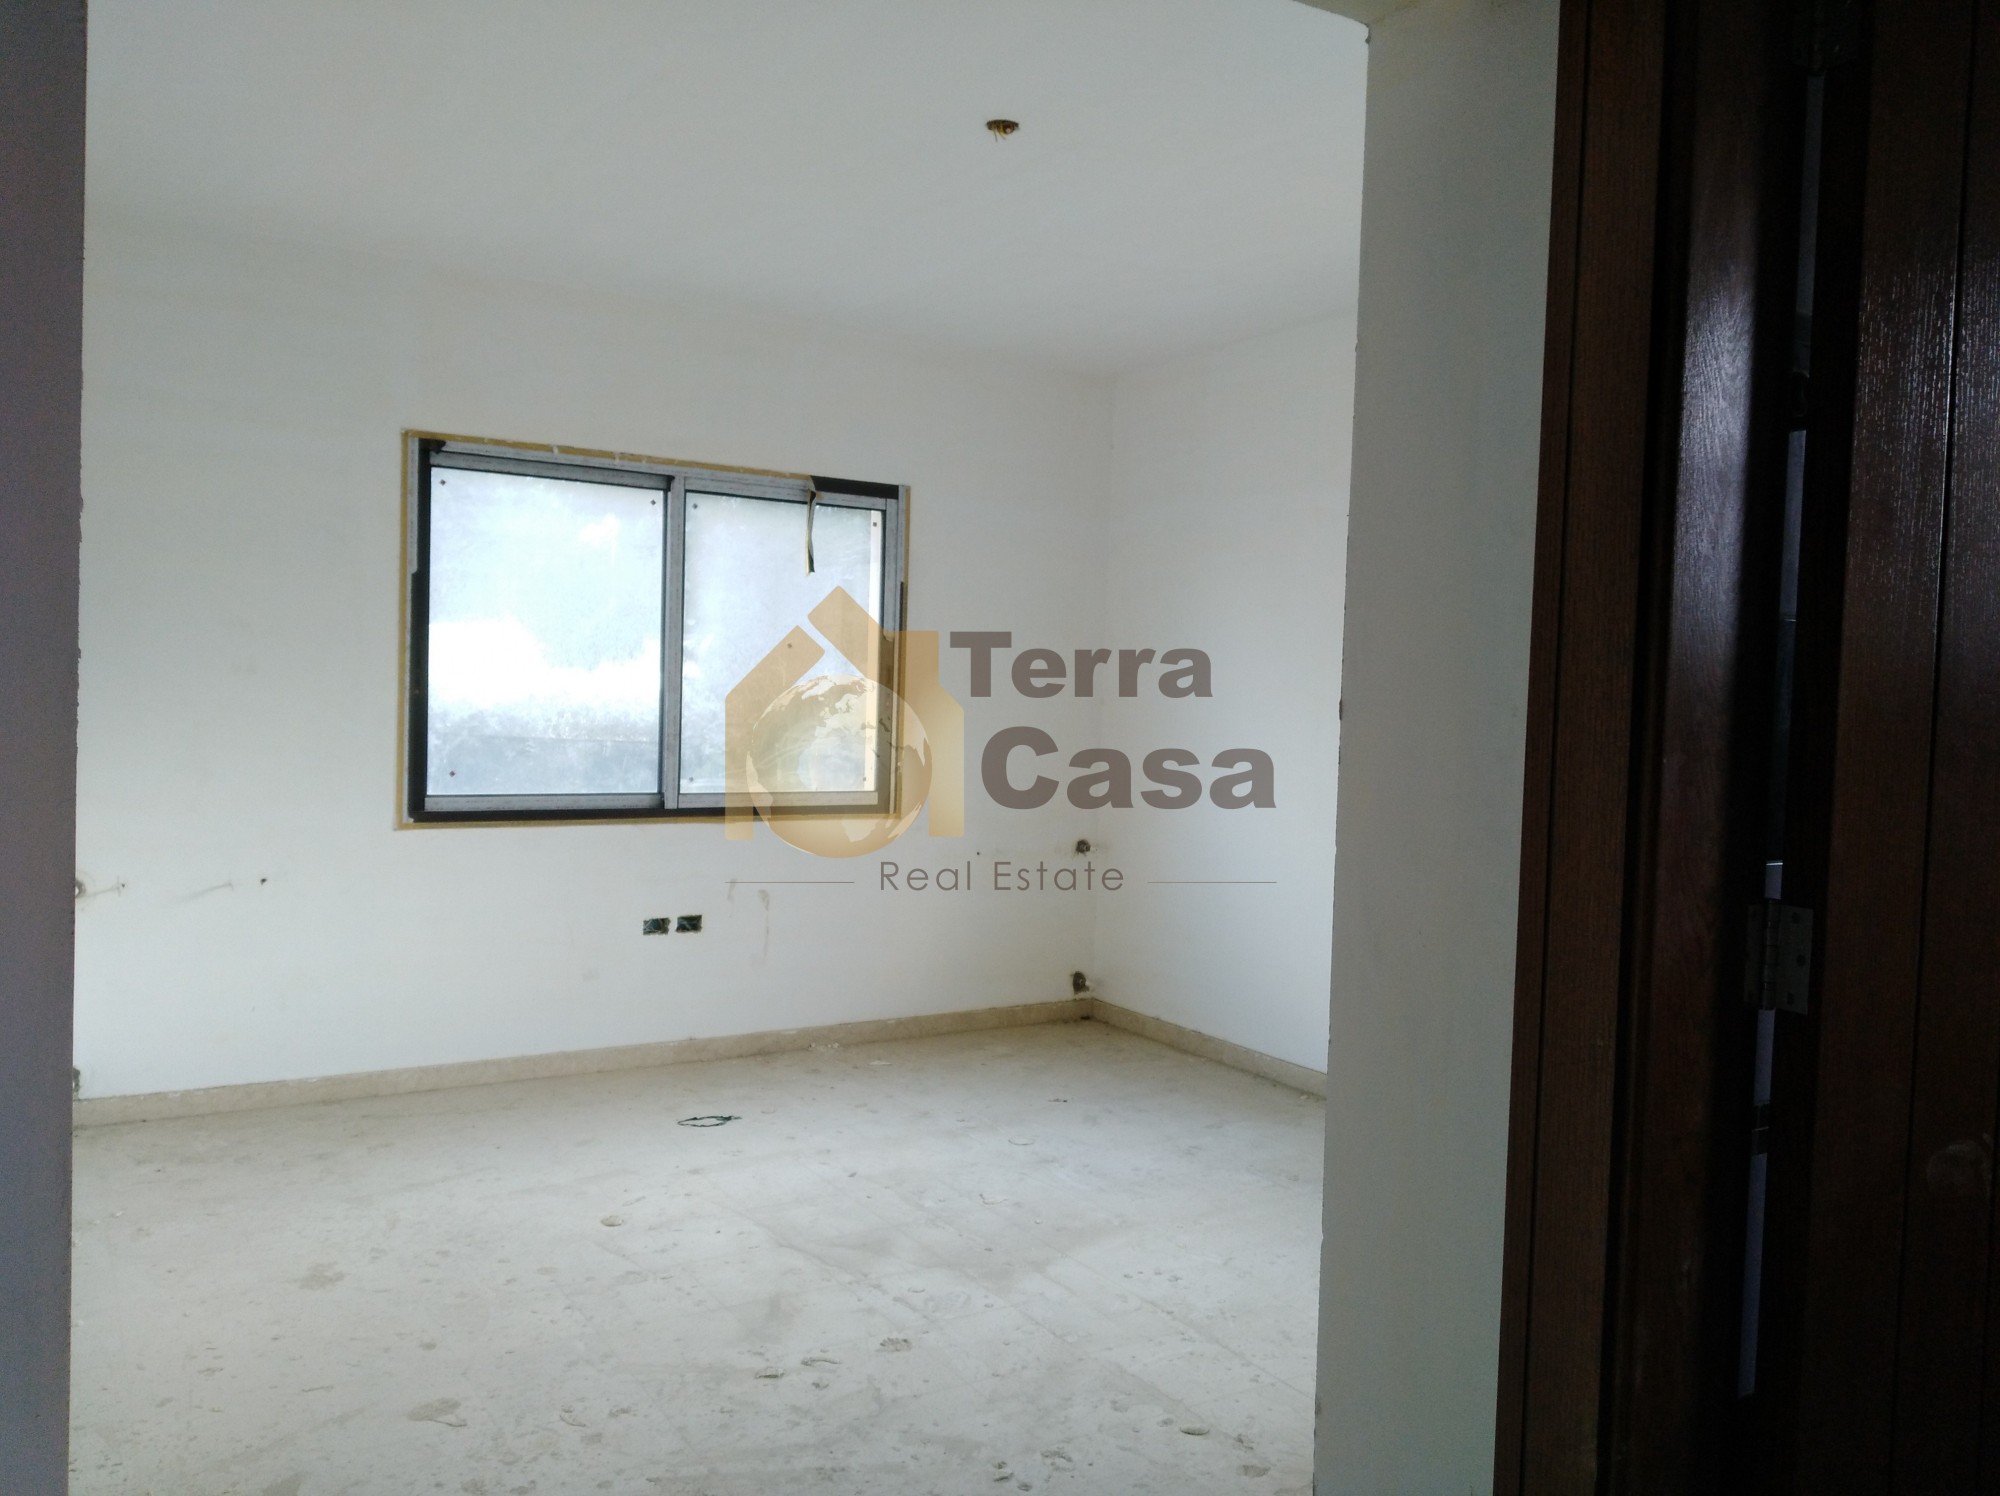 Apartment for sale in mar takla brand new luxurious finishing open view Ref#757